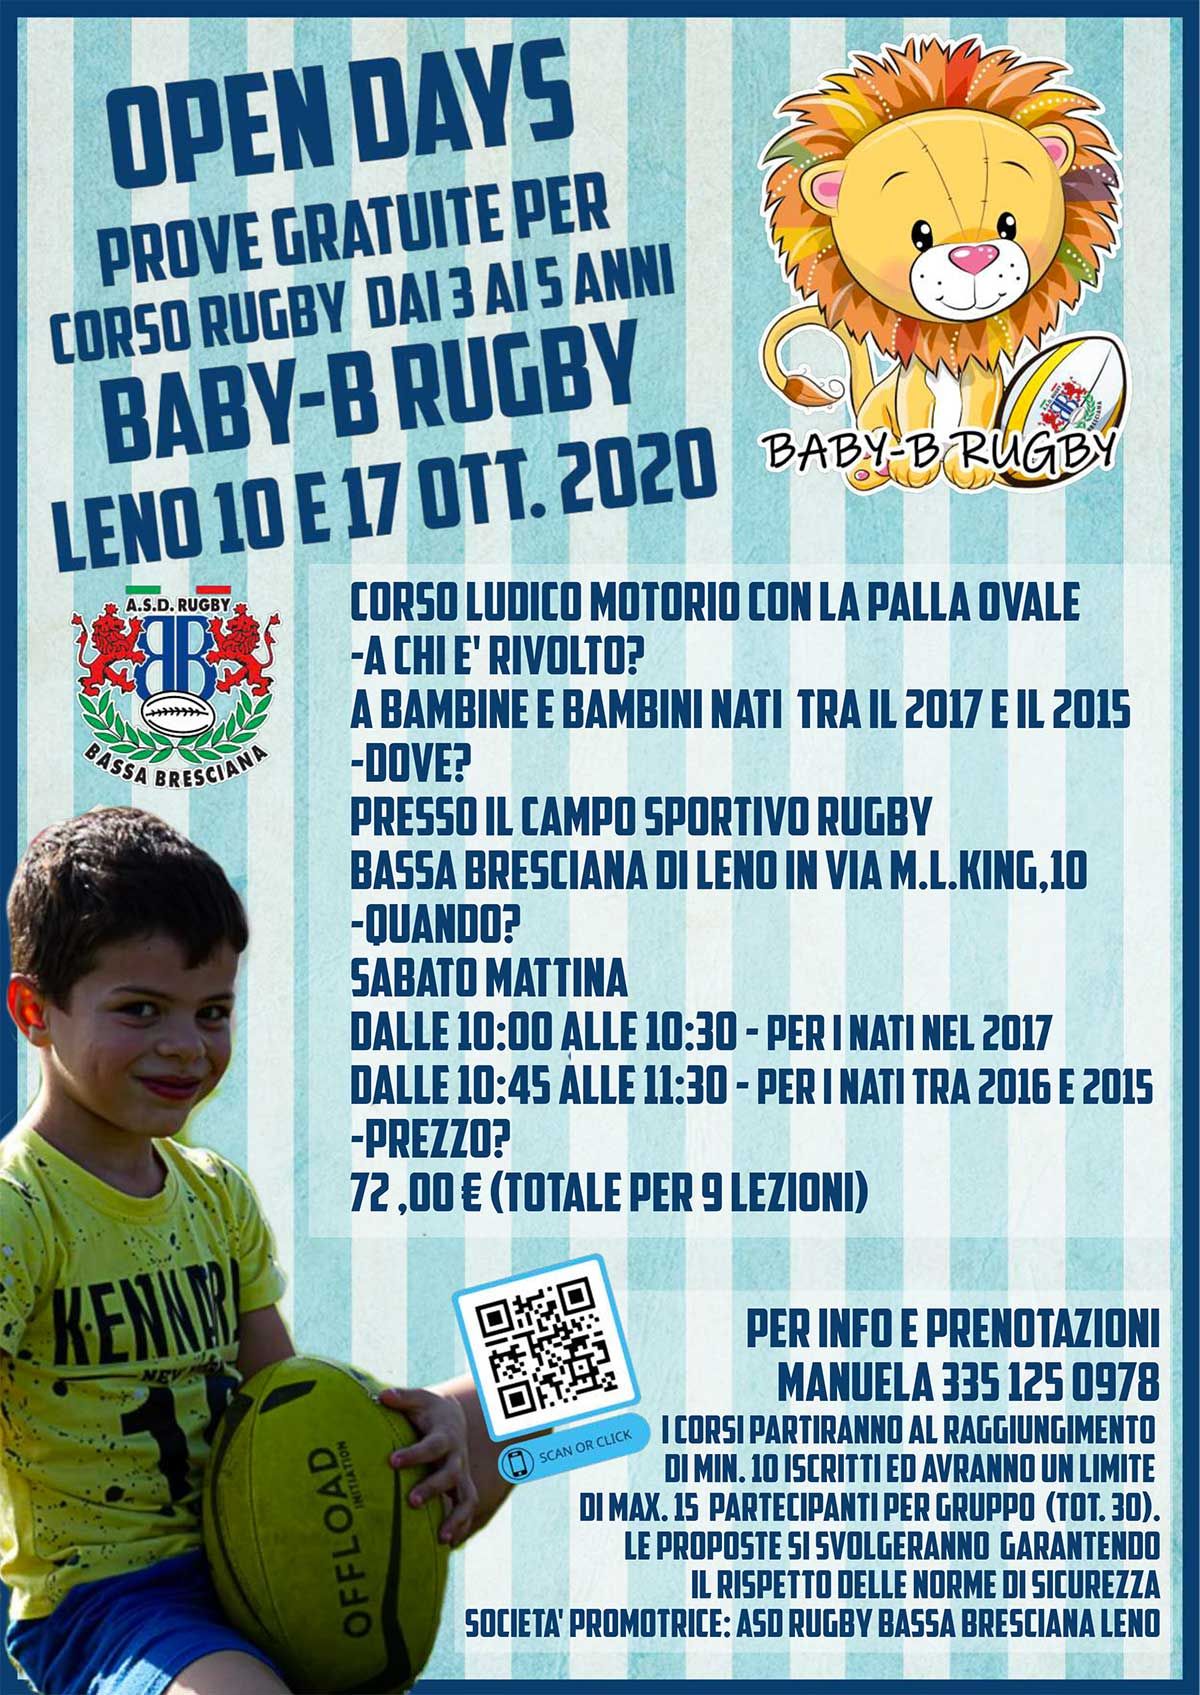 openday-BABY-B-RUGBY_2020